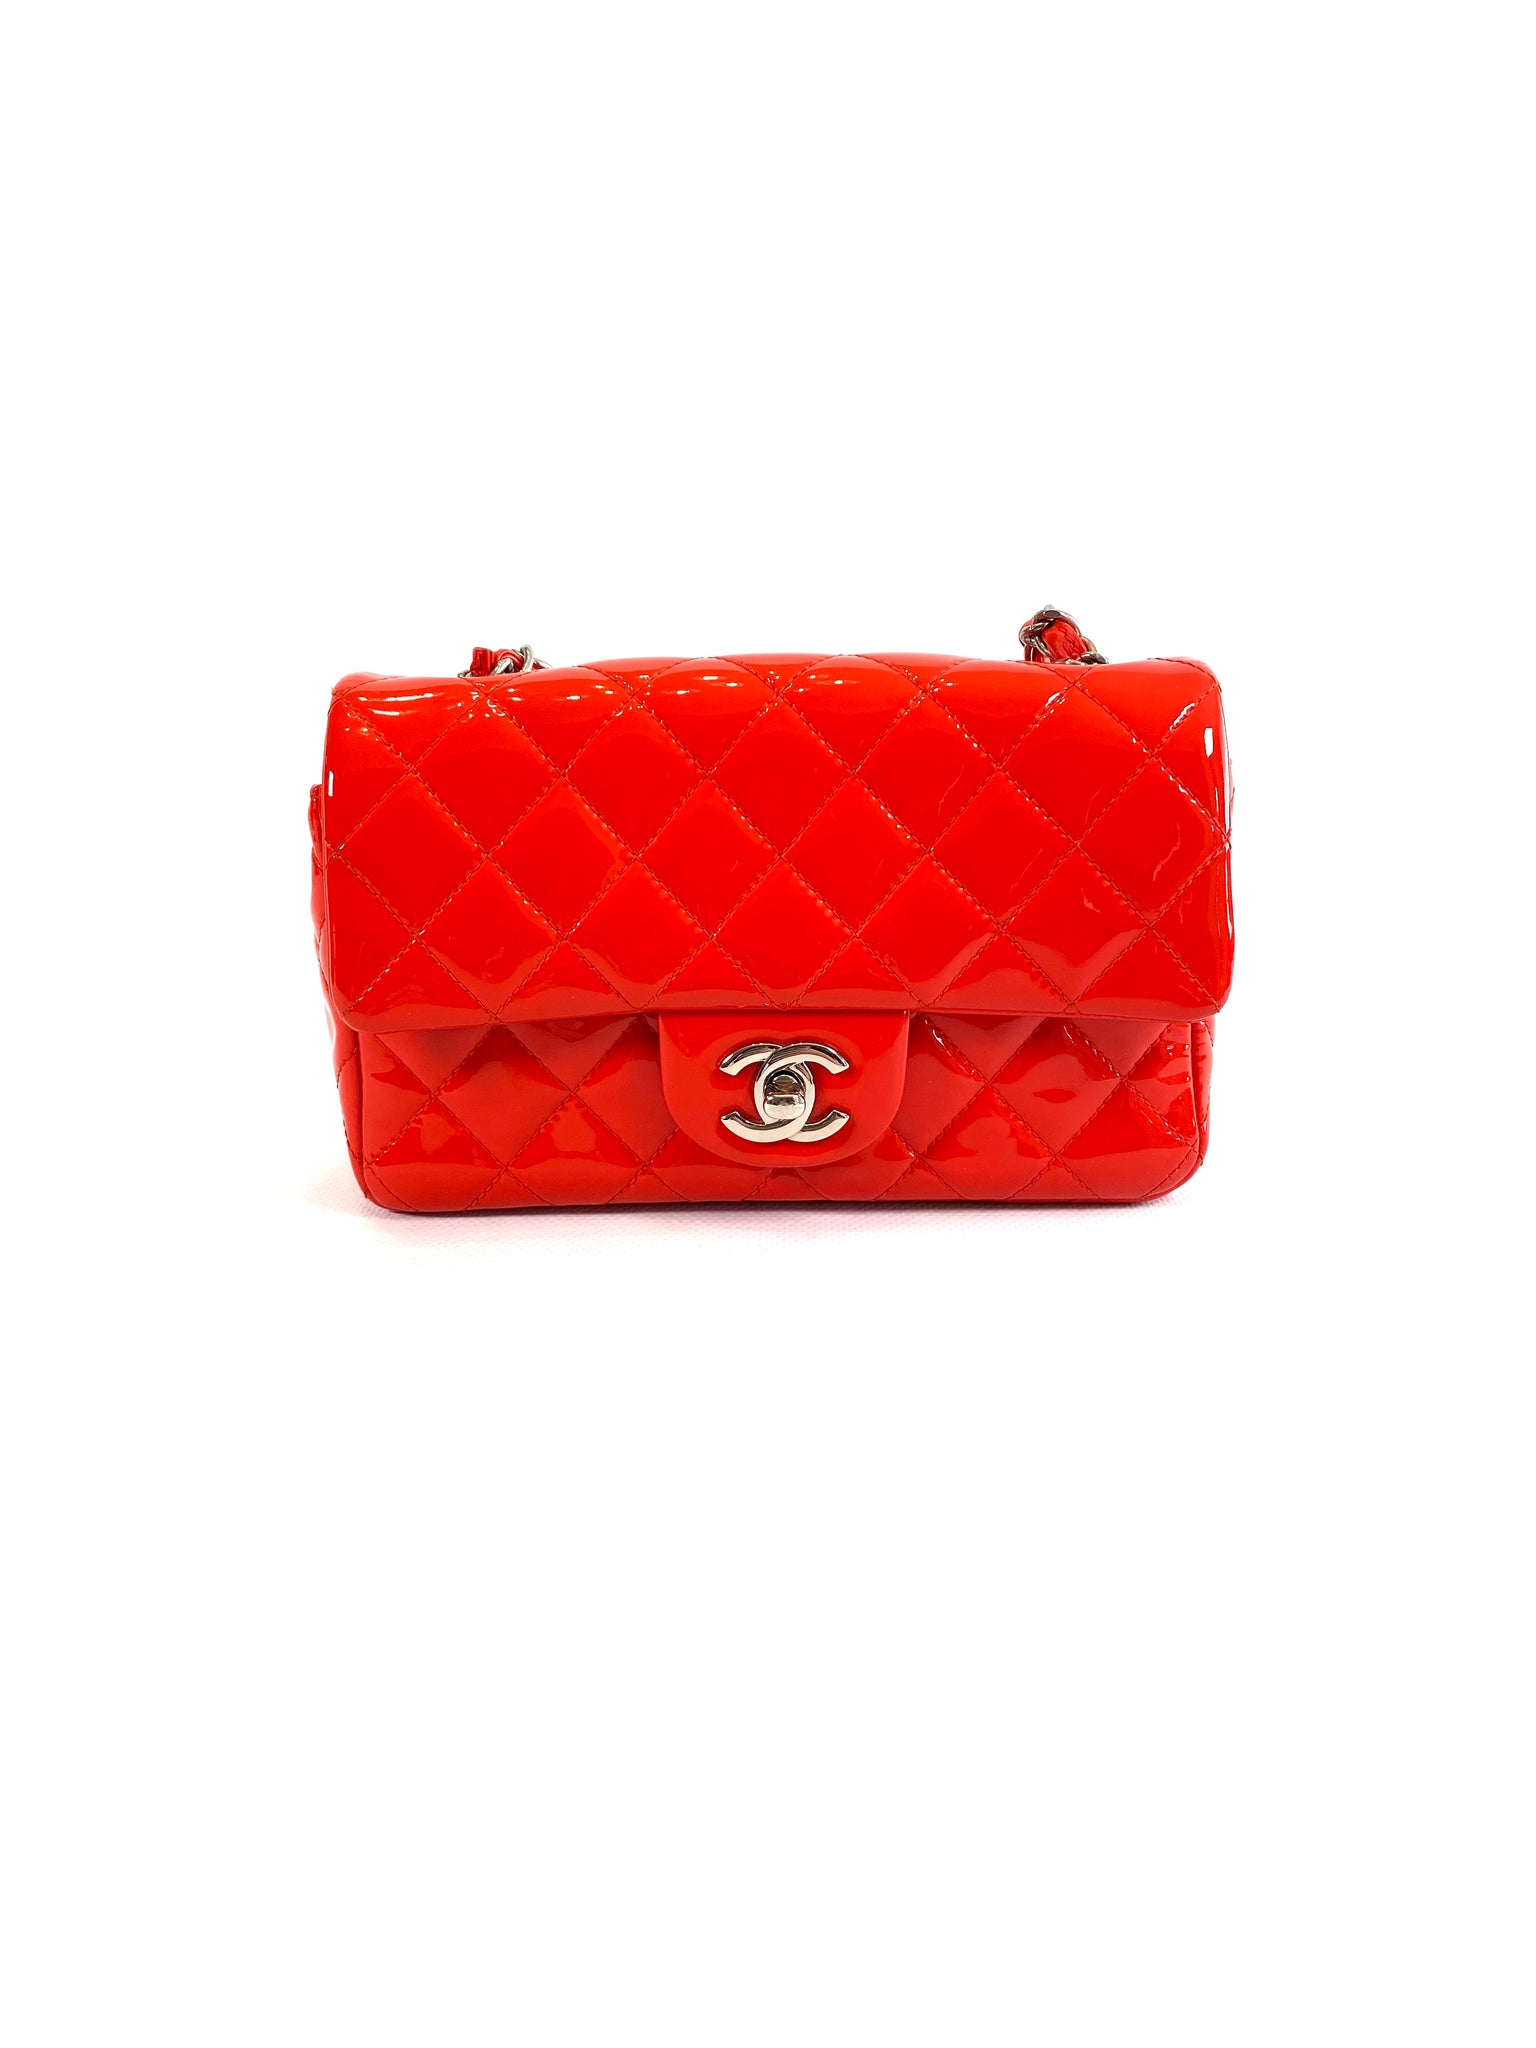 Chanel Mini Classic Flap Quilted Lambskin Bag in Dark Red